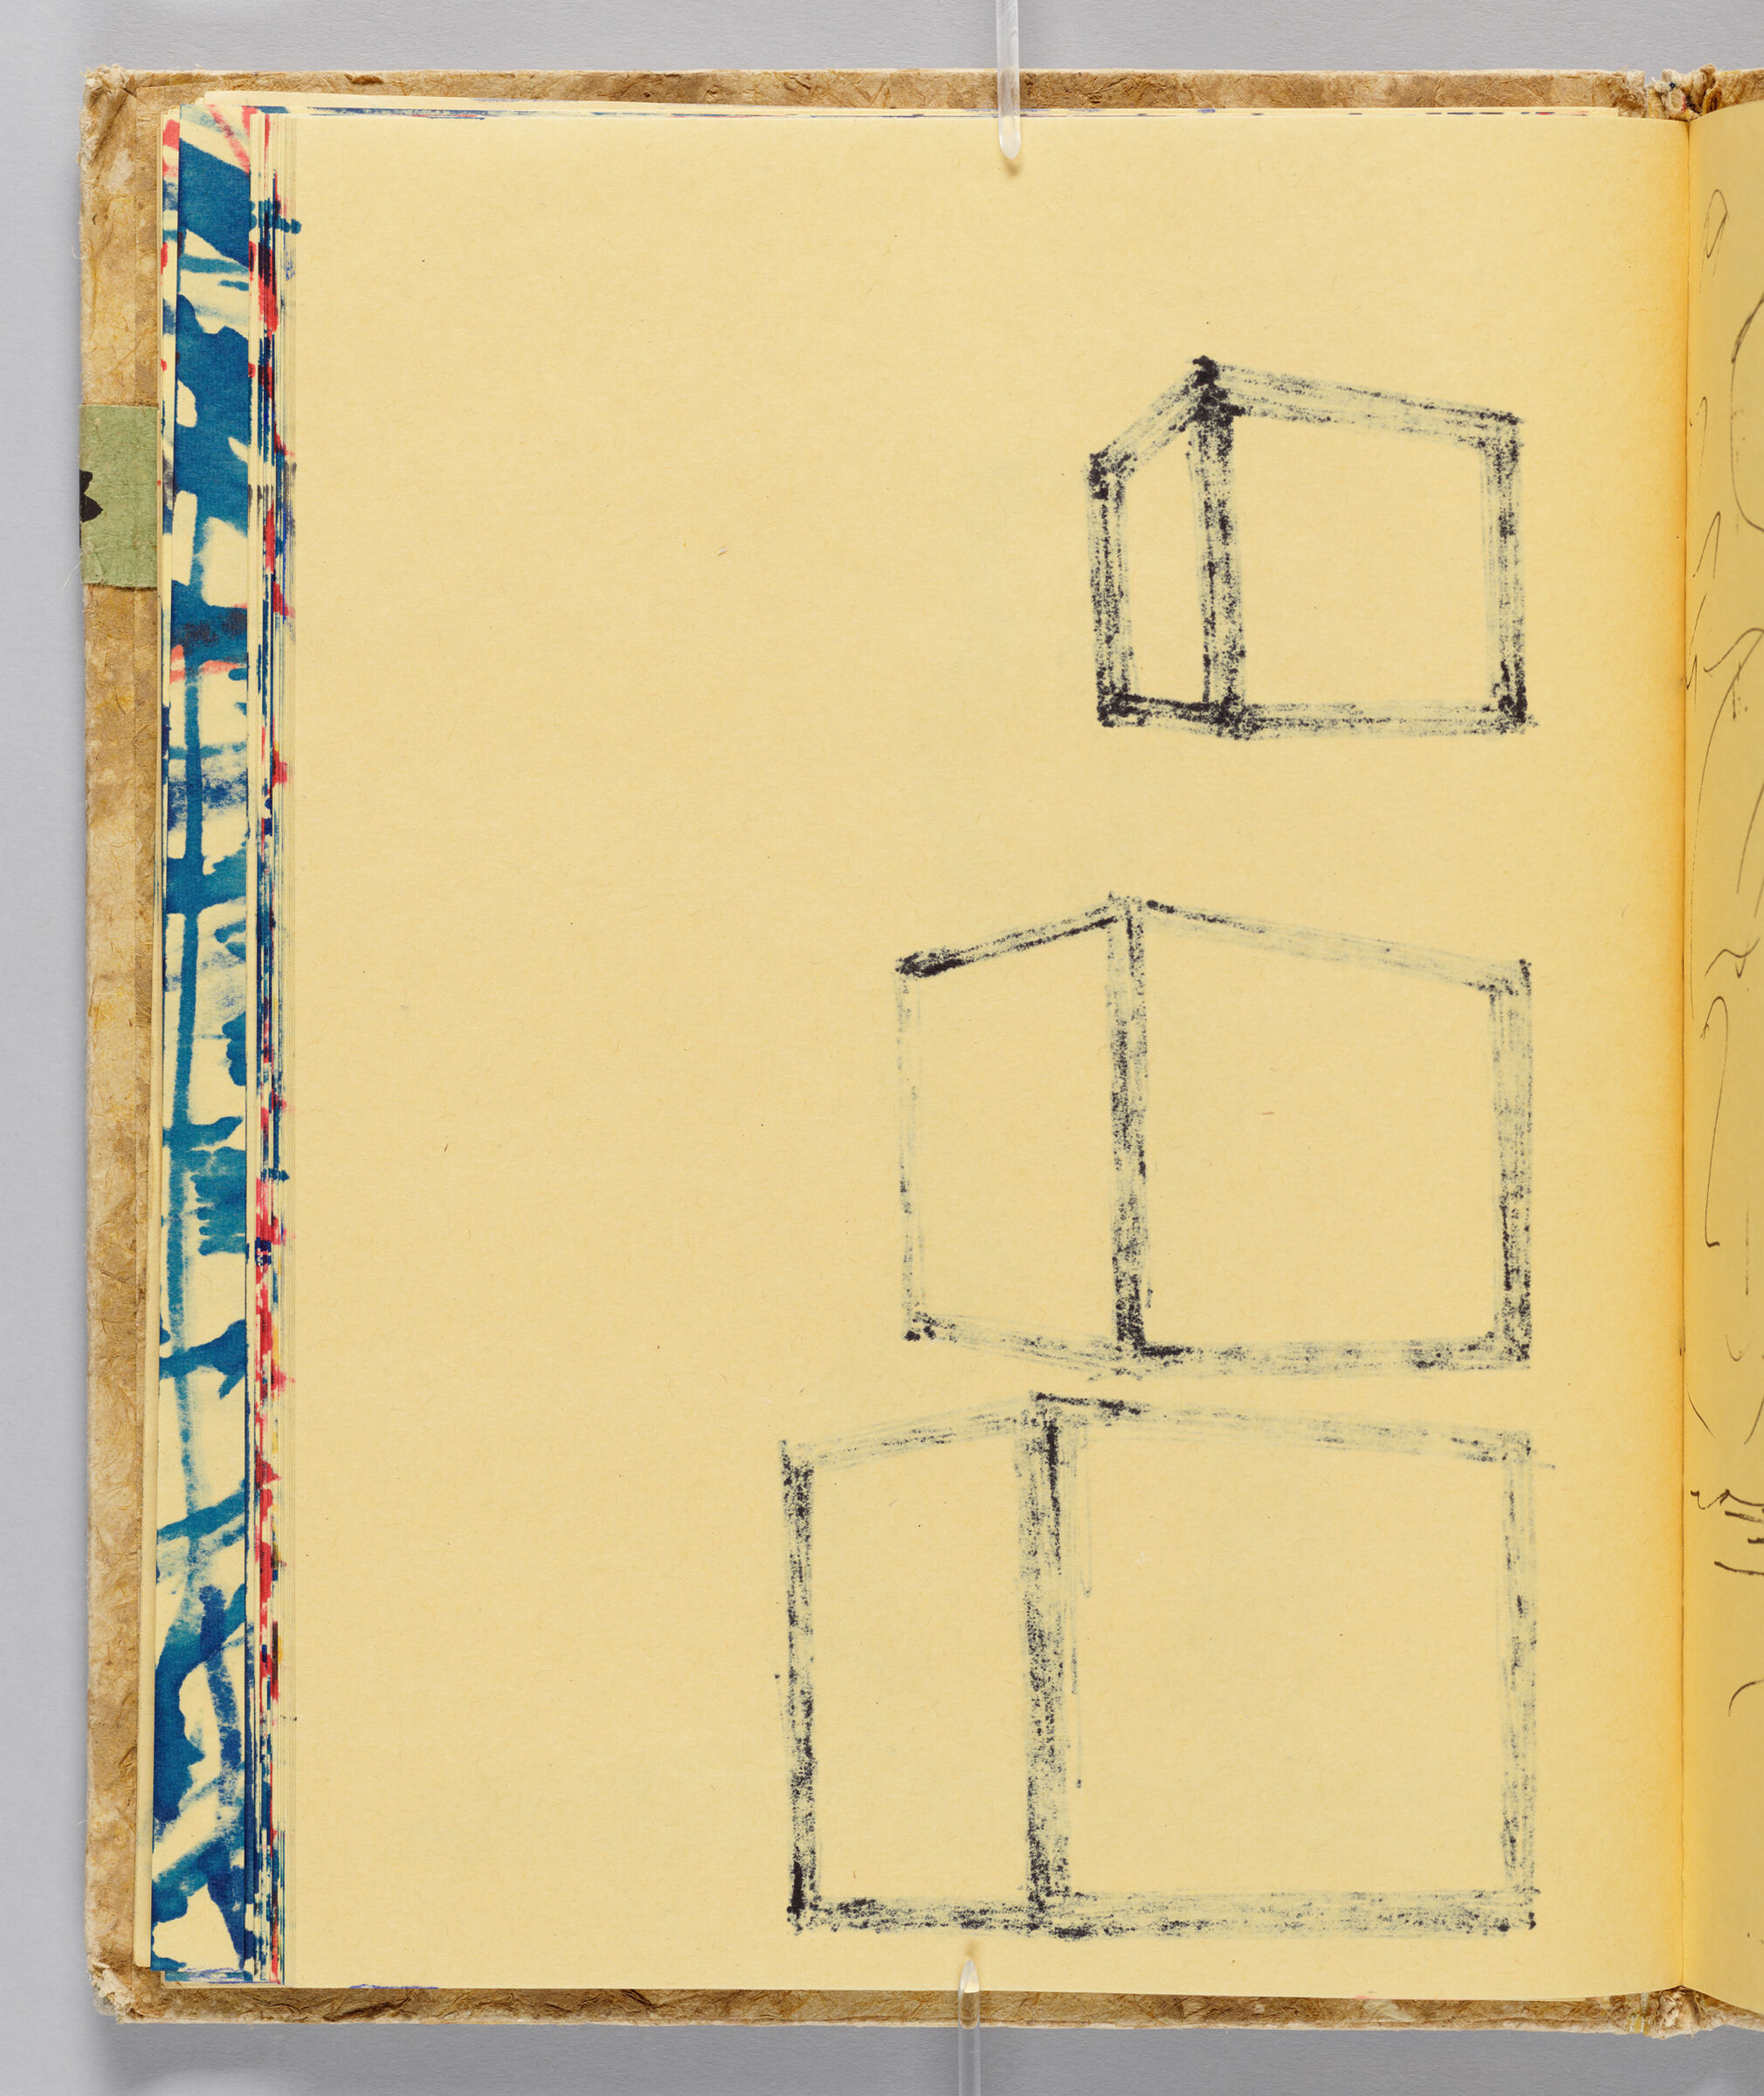 Untitled (Bleed-Through Of Previous Page, Left Page); Untitled (Cube, Right Page)